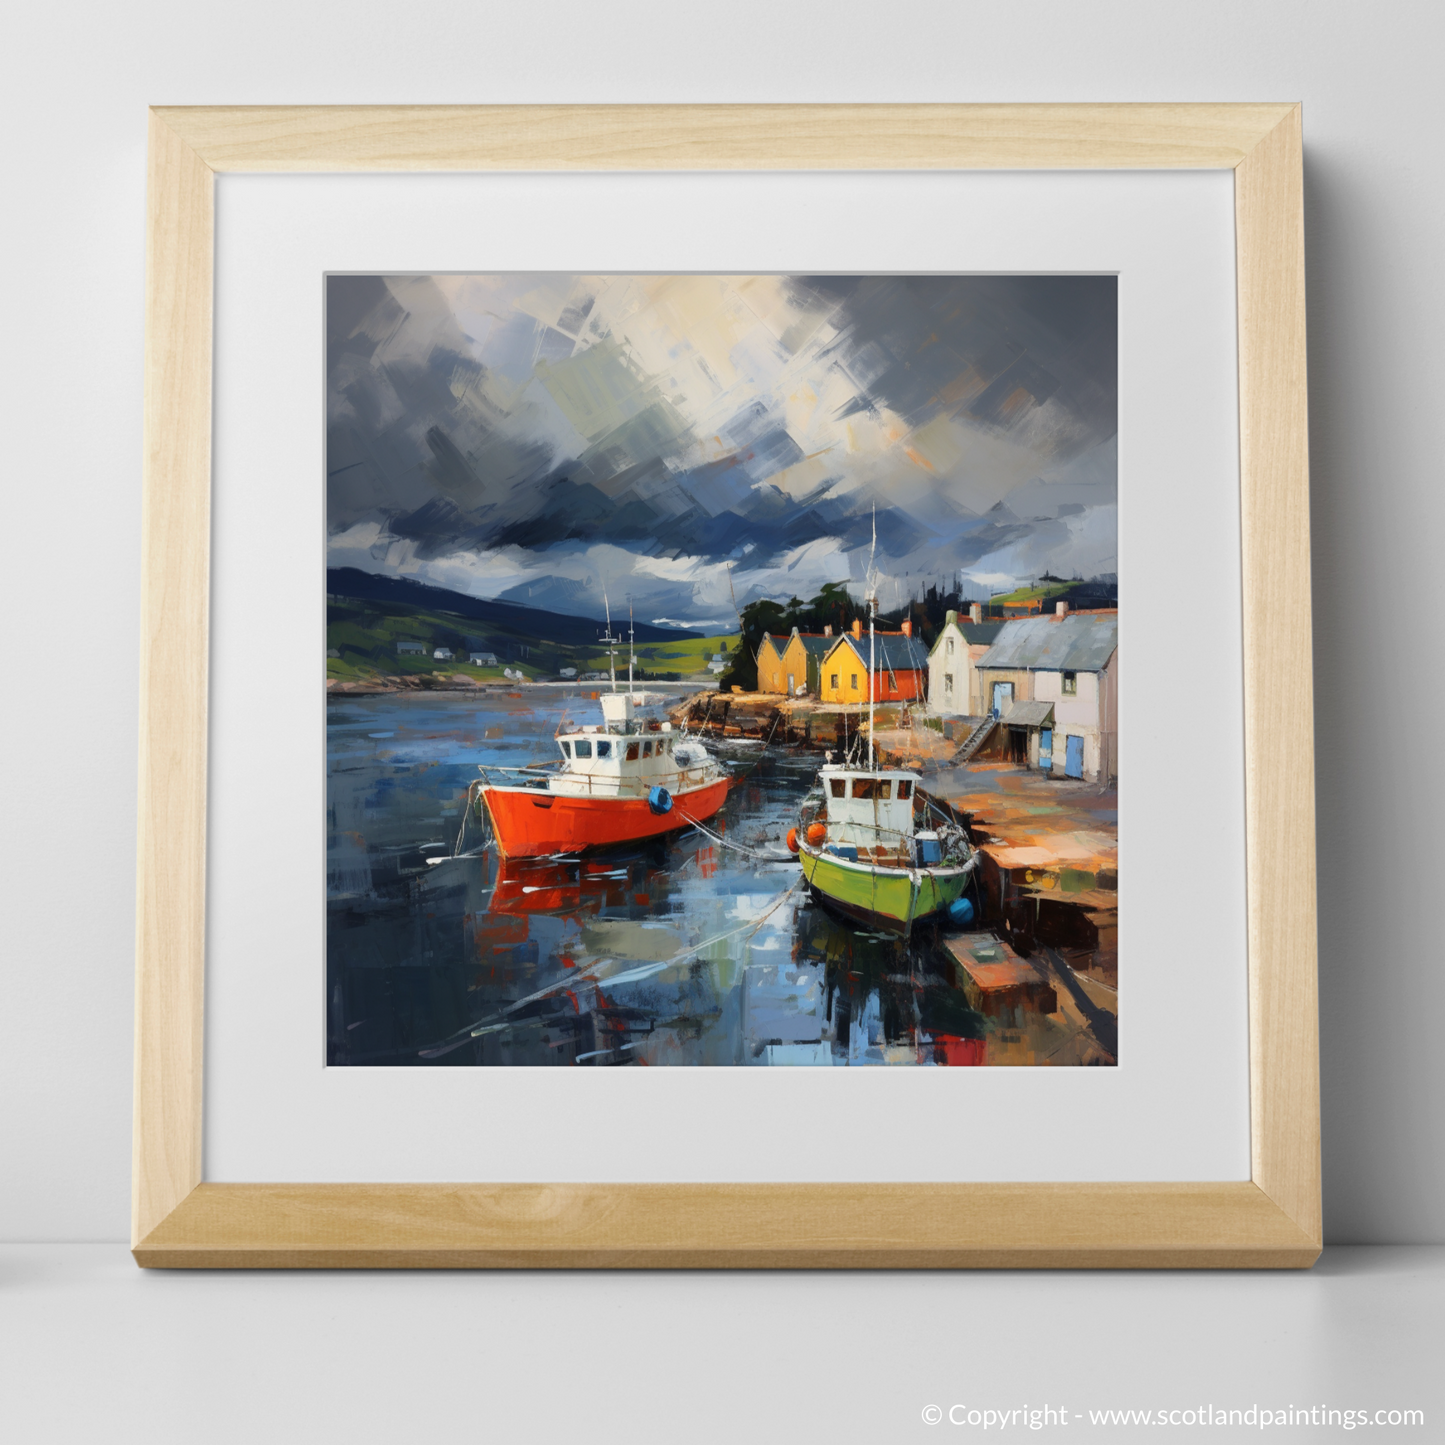 Art Print of Cromarty Harbour with a stormy sky with a natural frame